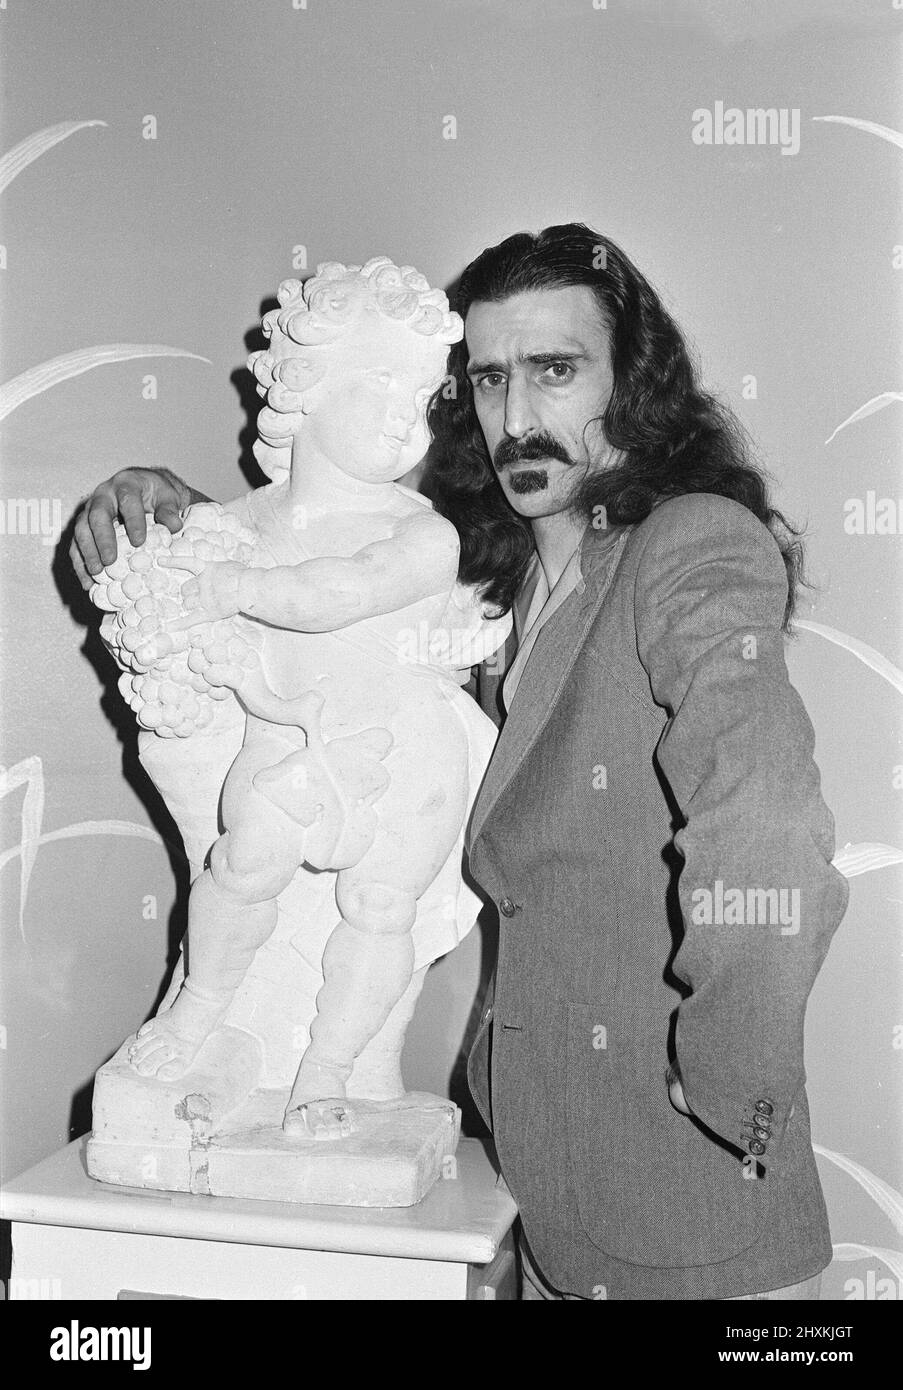 Frank Zappa. American musician.Pictured at The Dorchester Hotel in London. The cherub statue belongs to the hotel. Picture taken 8h February 1977 Stock Photo